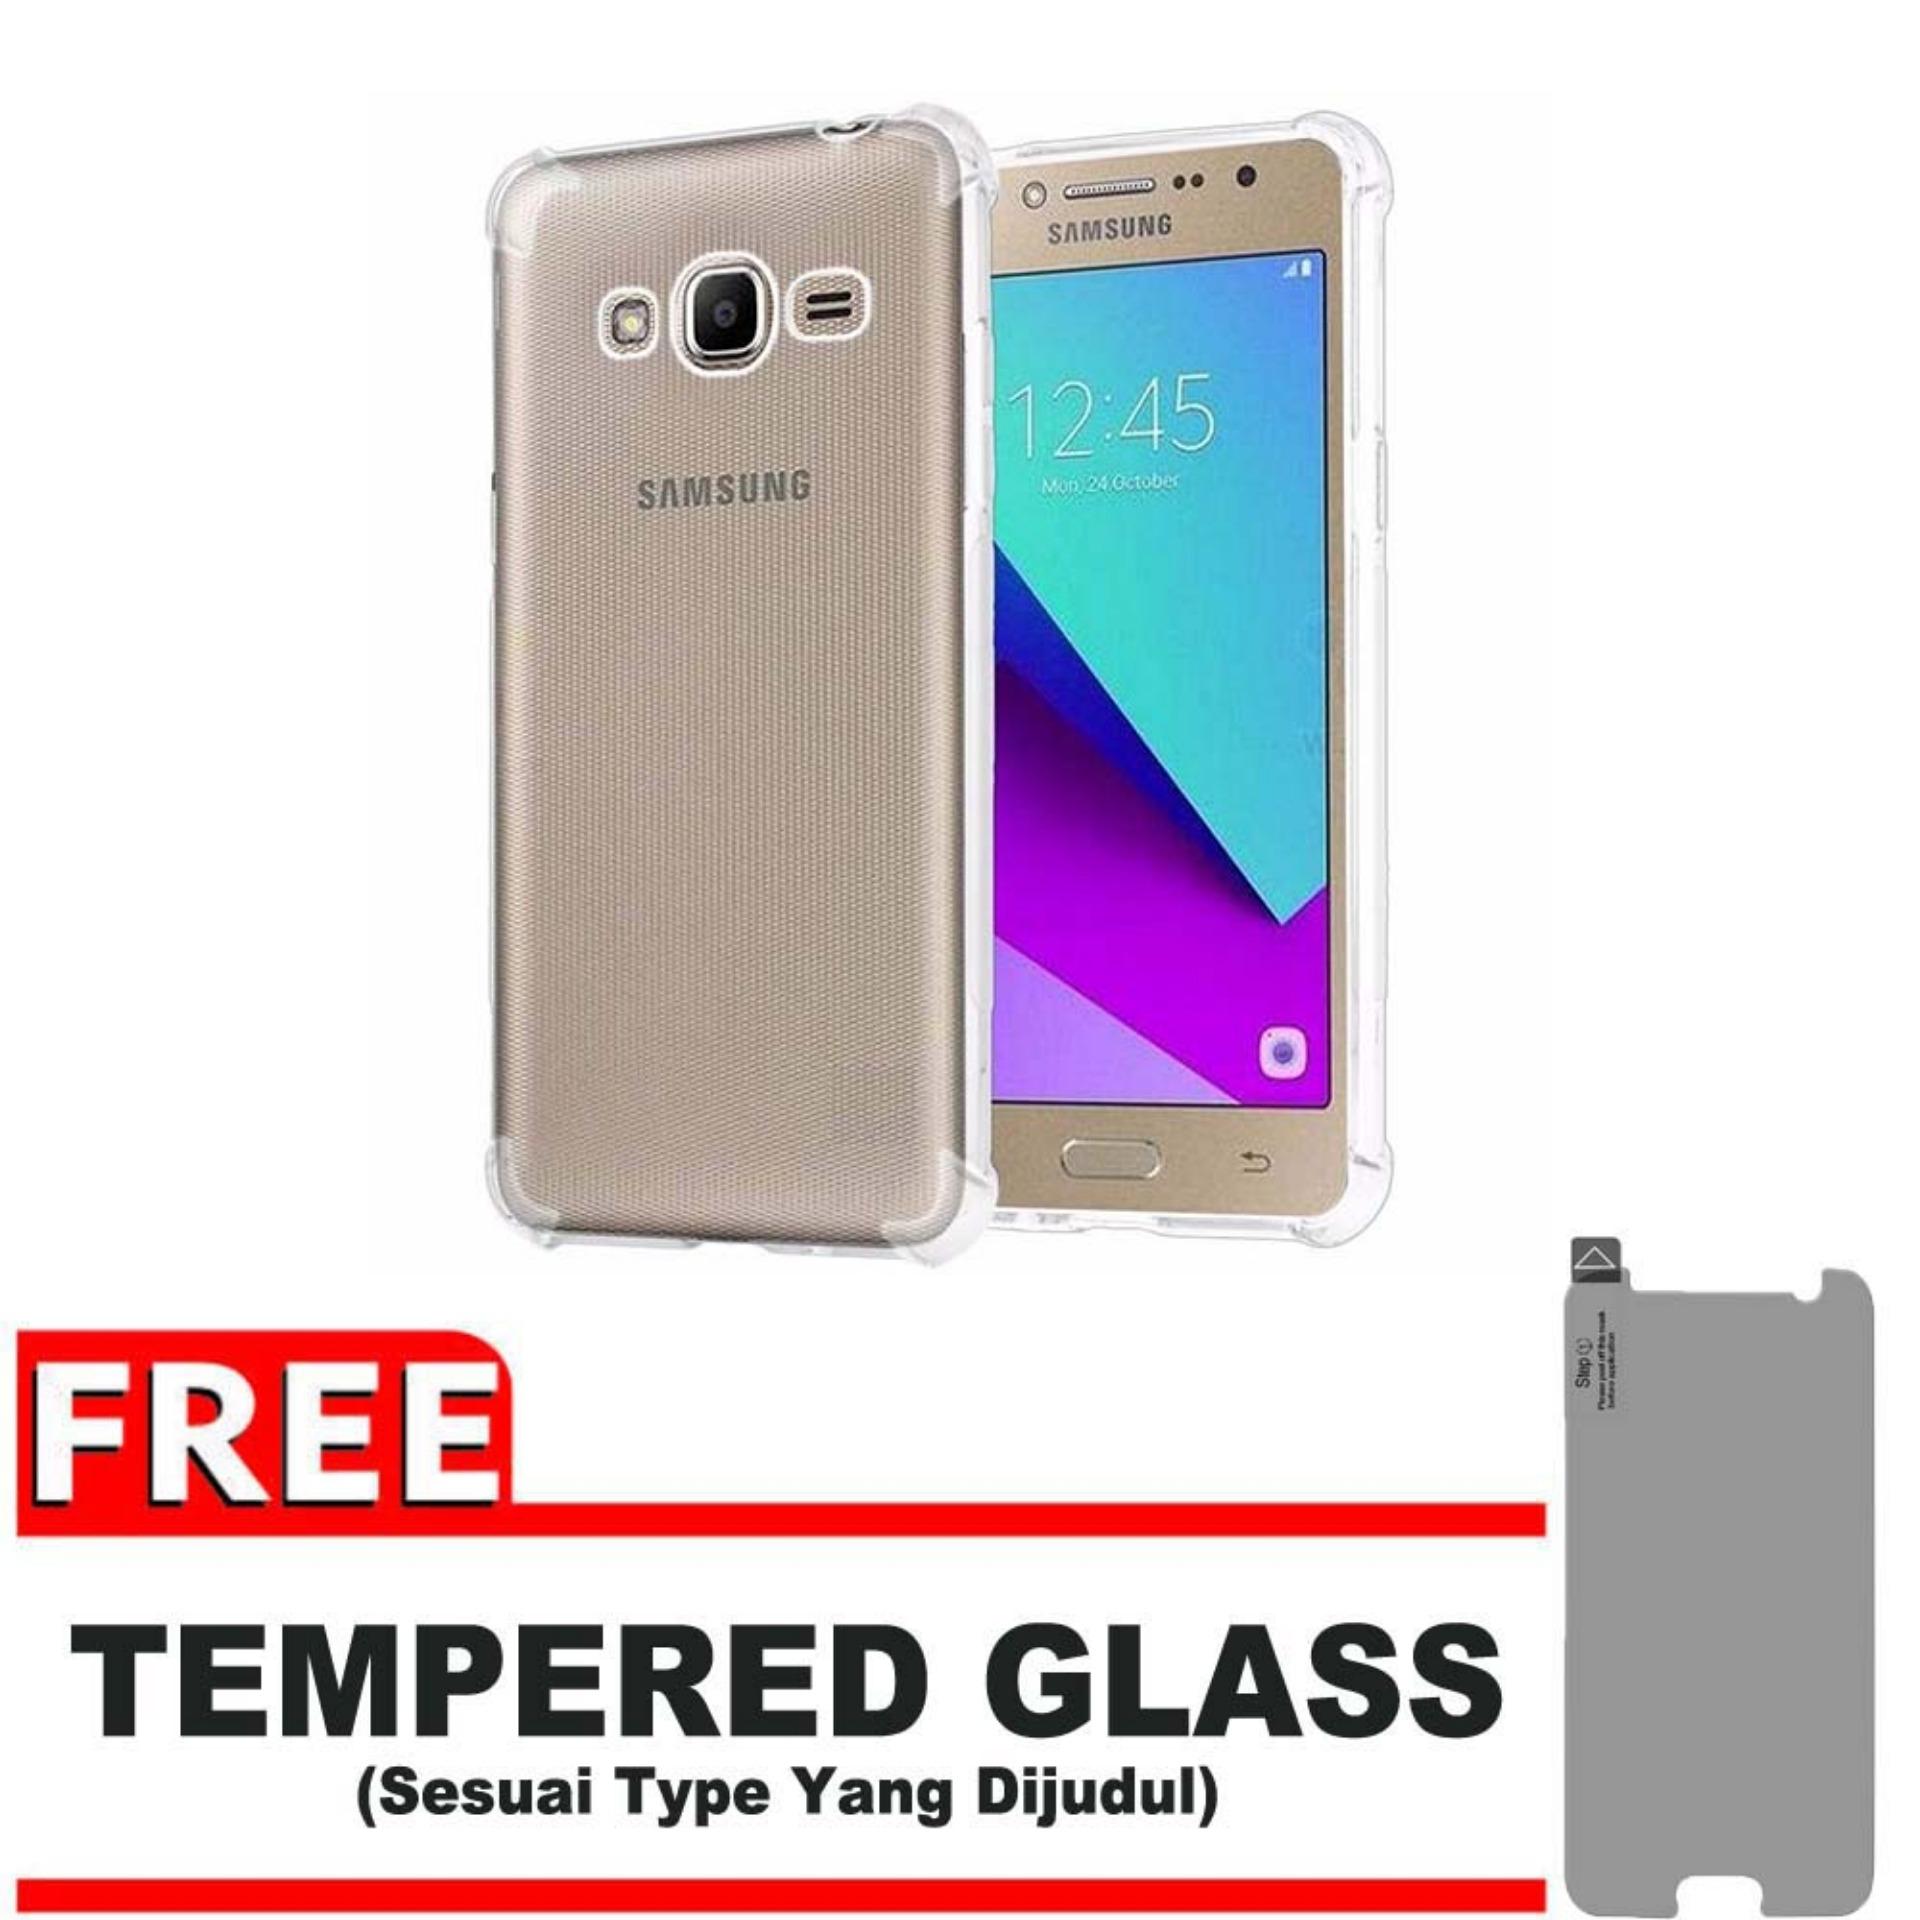 ShockCase for Samsung Galaxy J2 Prime / 4G LTE / Duos| Premium Softcase Jelly Anti Crack Shockproof - Gratis Free Tempered Glass Protector - Transparan